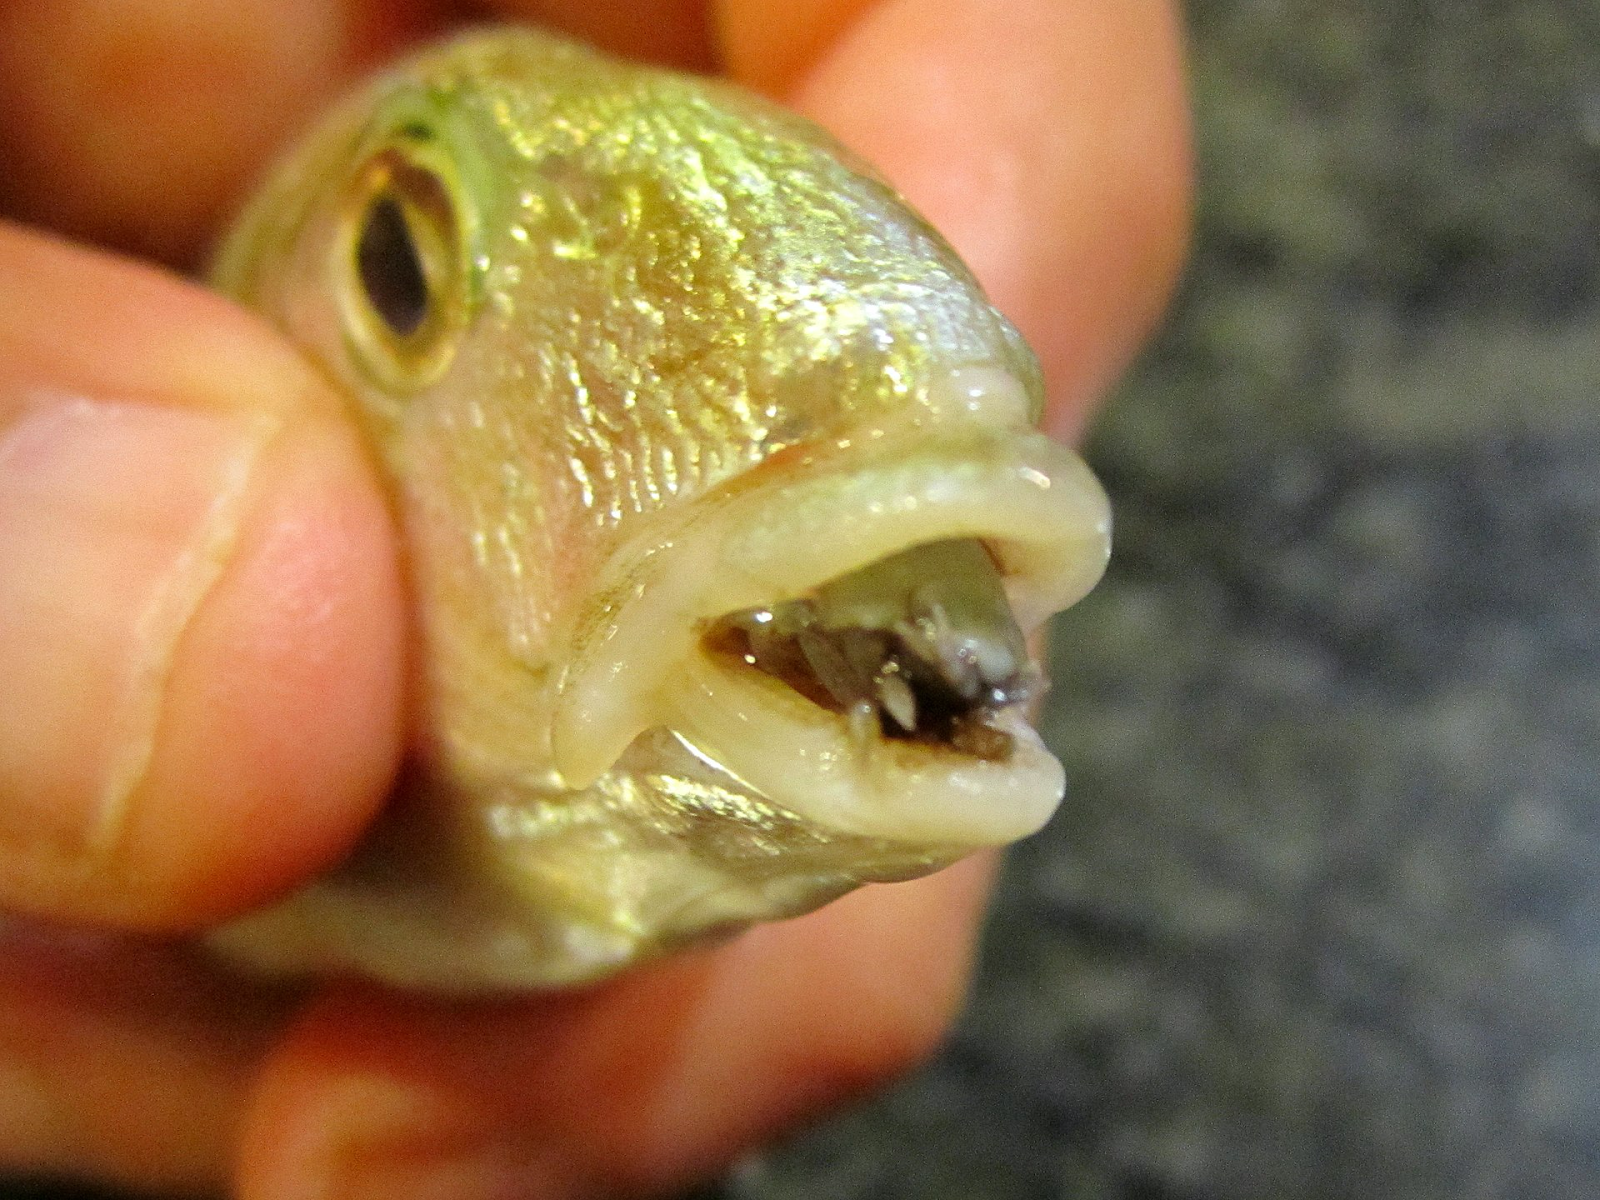 A human hand holds a small fish mouth open, where an isopod can be seen filling the space.